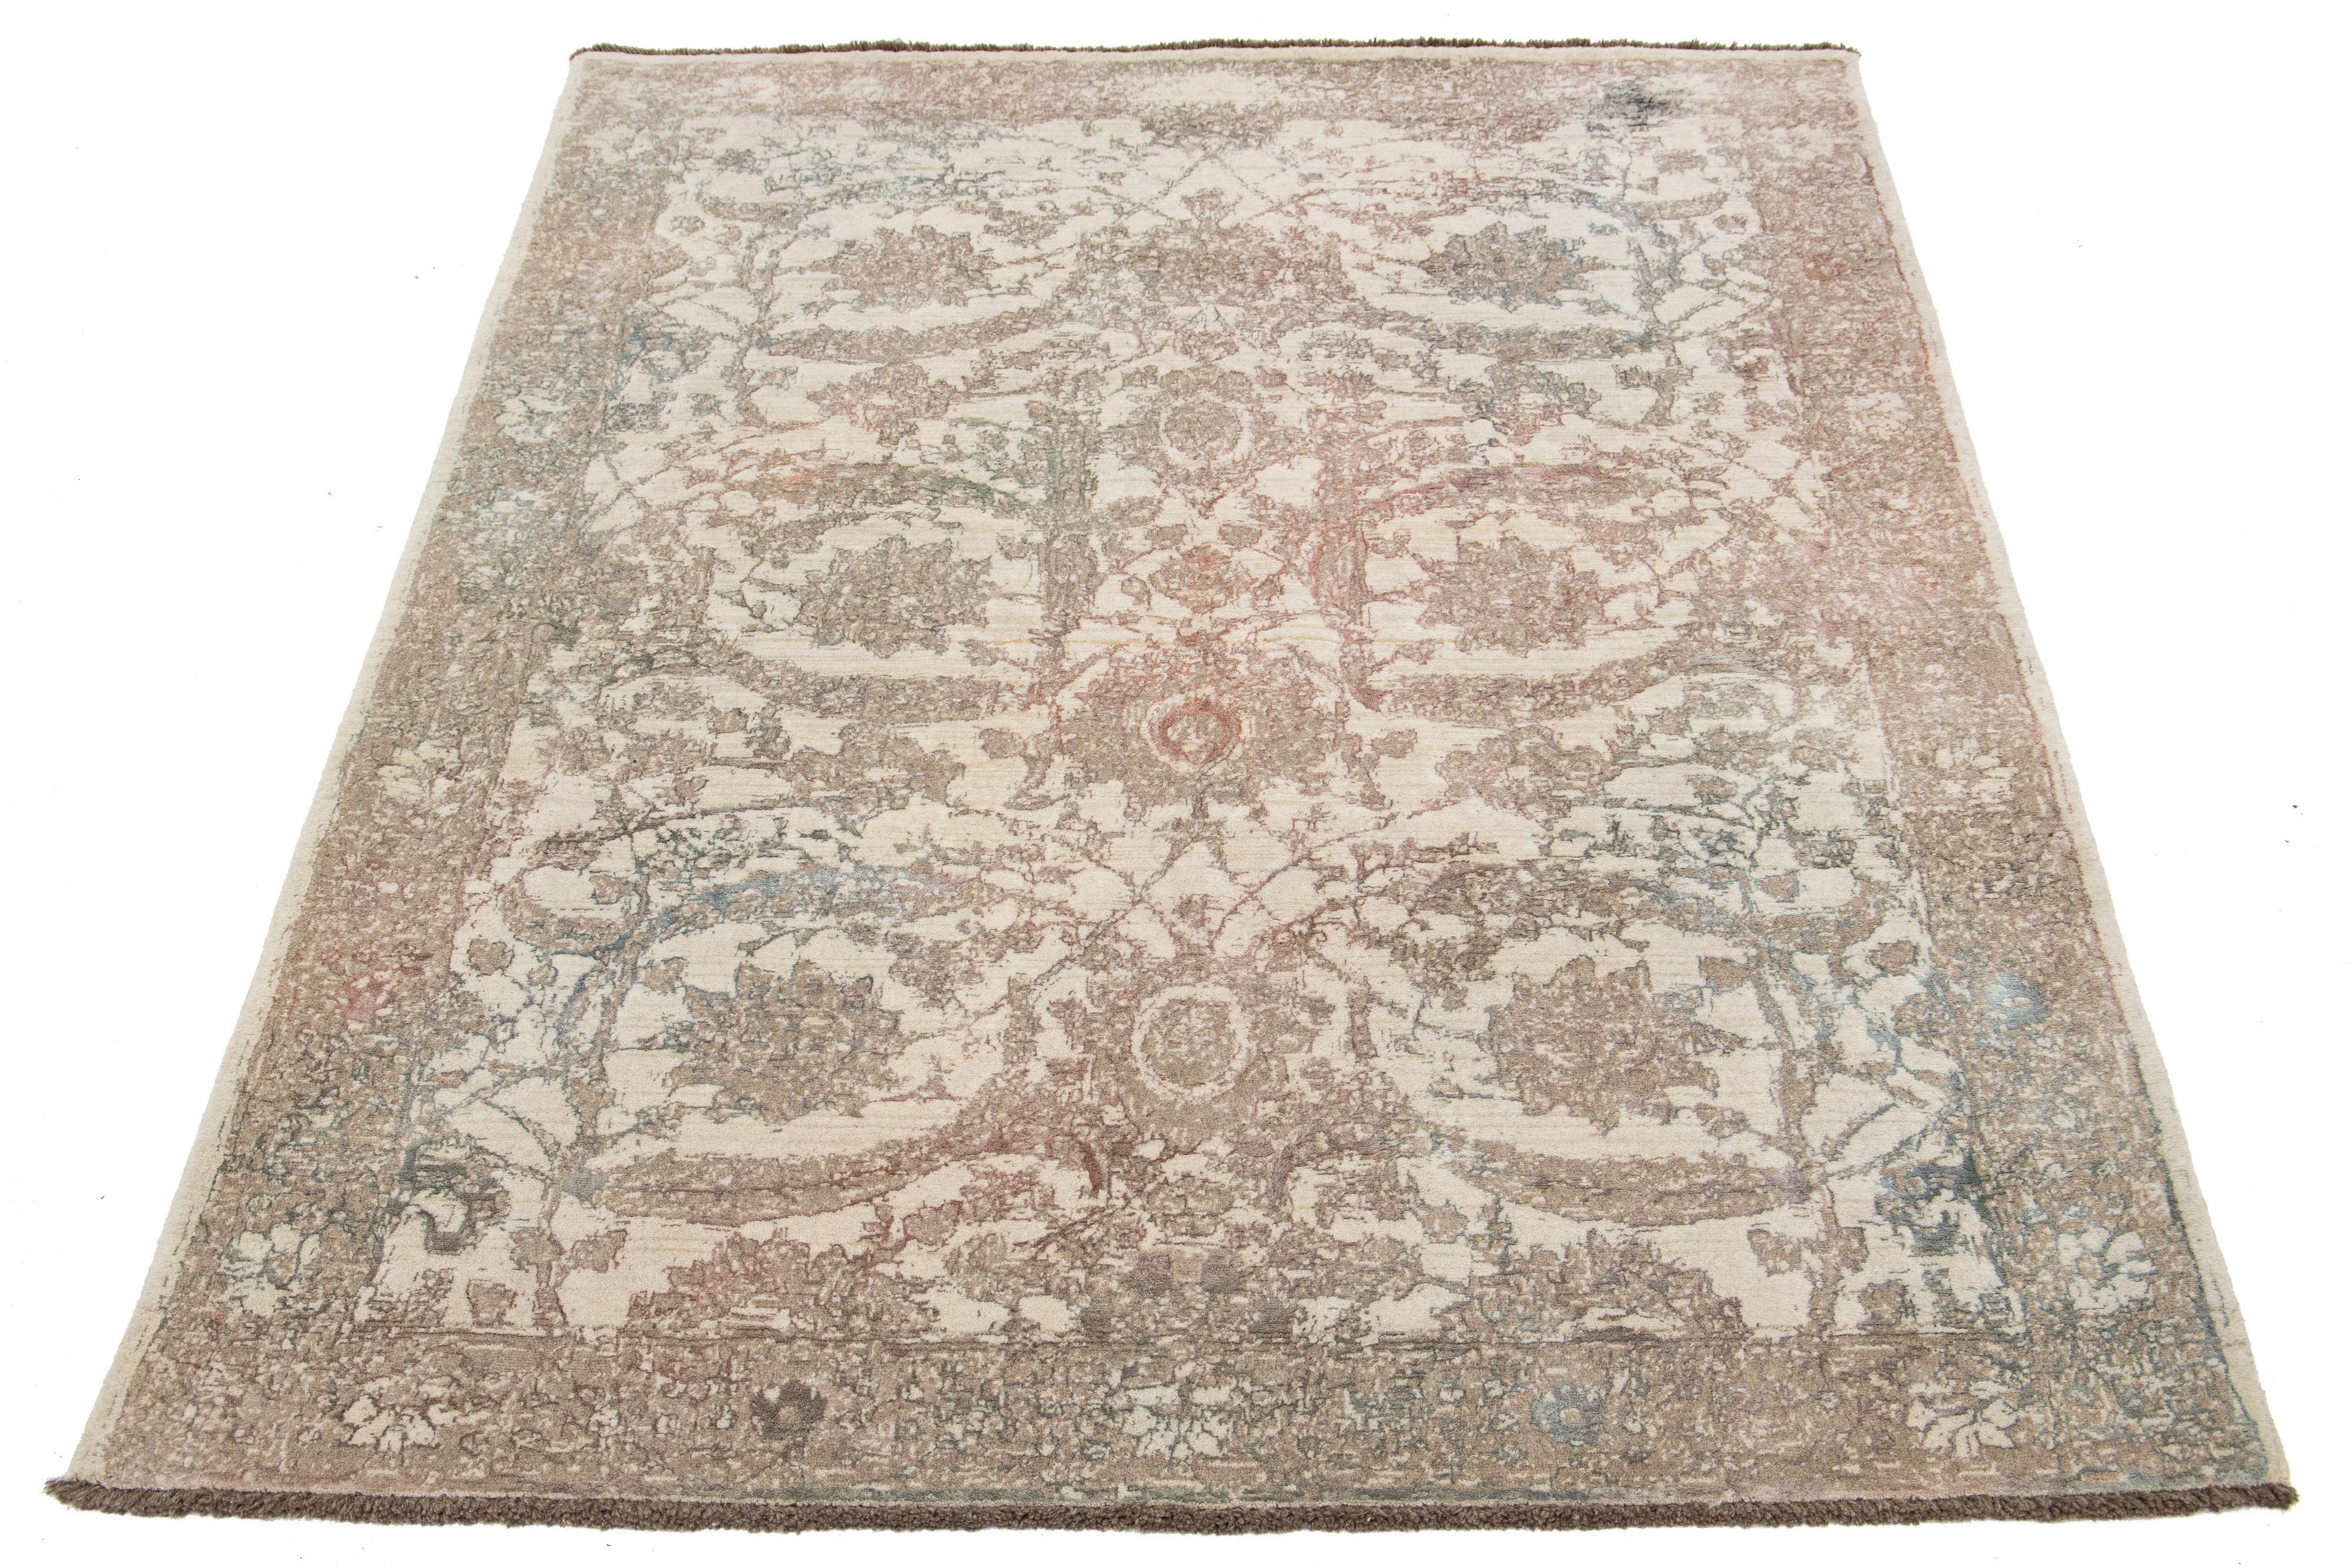 A beautiful modern Oushak rug made of hand-knotted wool. The rug features a beige field with brown, green, and peach accents in a stunning floral design.

This rug measures 5'7